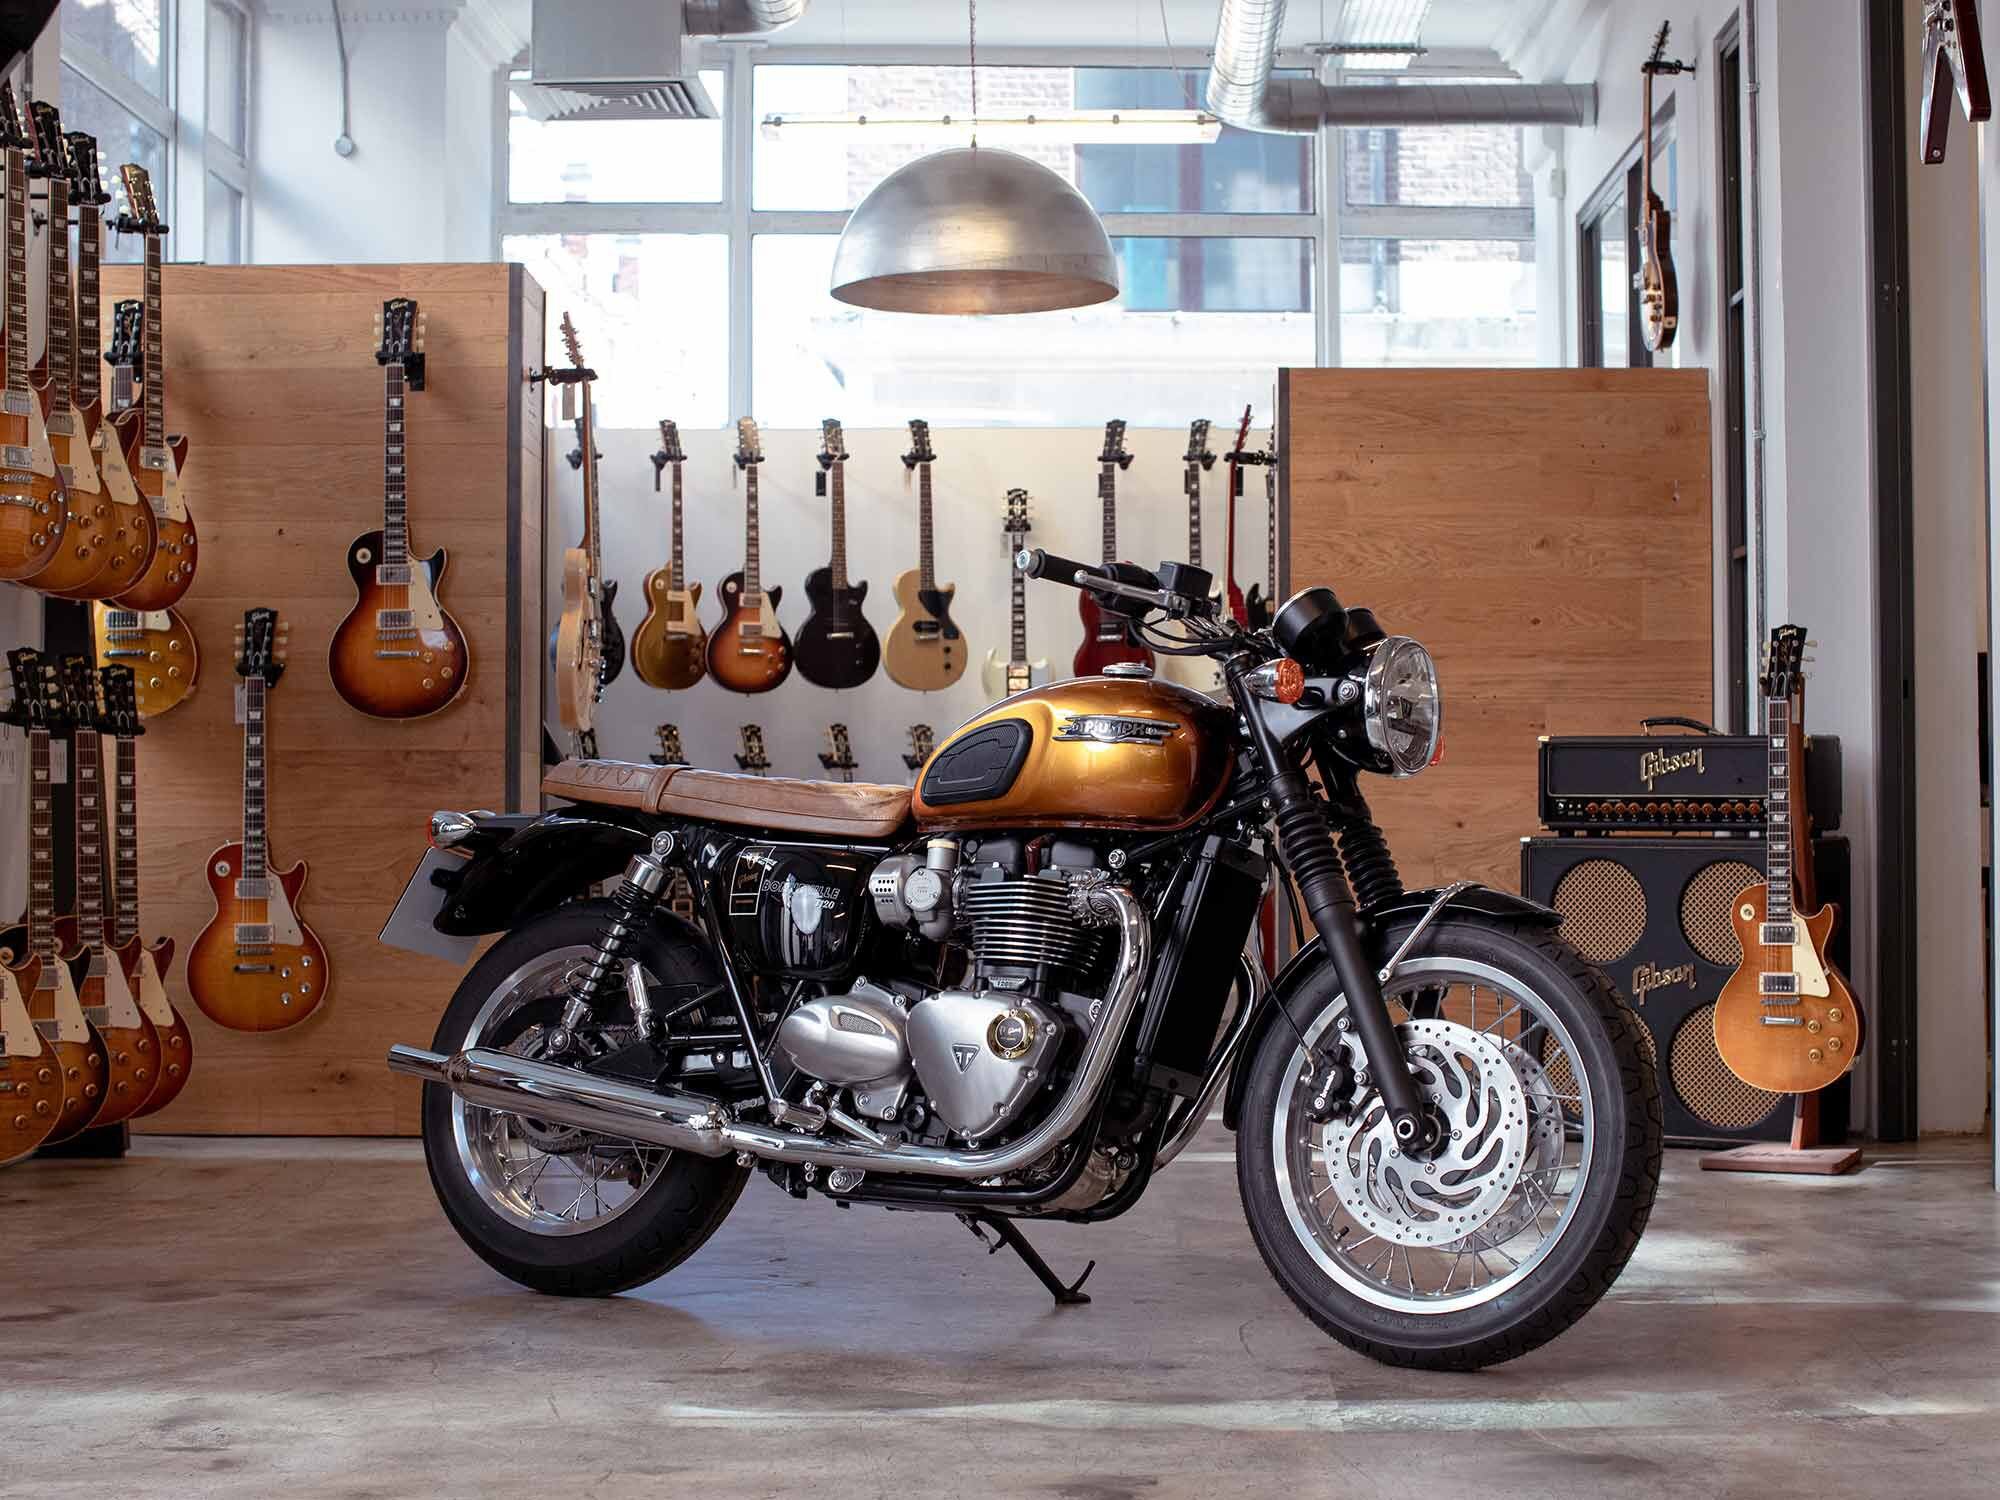 Two legends unite to influence each other for a good cause. Meet the Triumph Bonneville T120 Custom and 1959 Gibson Les Paul Standard Reissue.